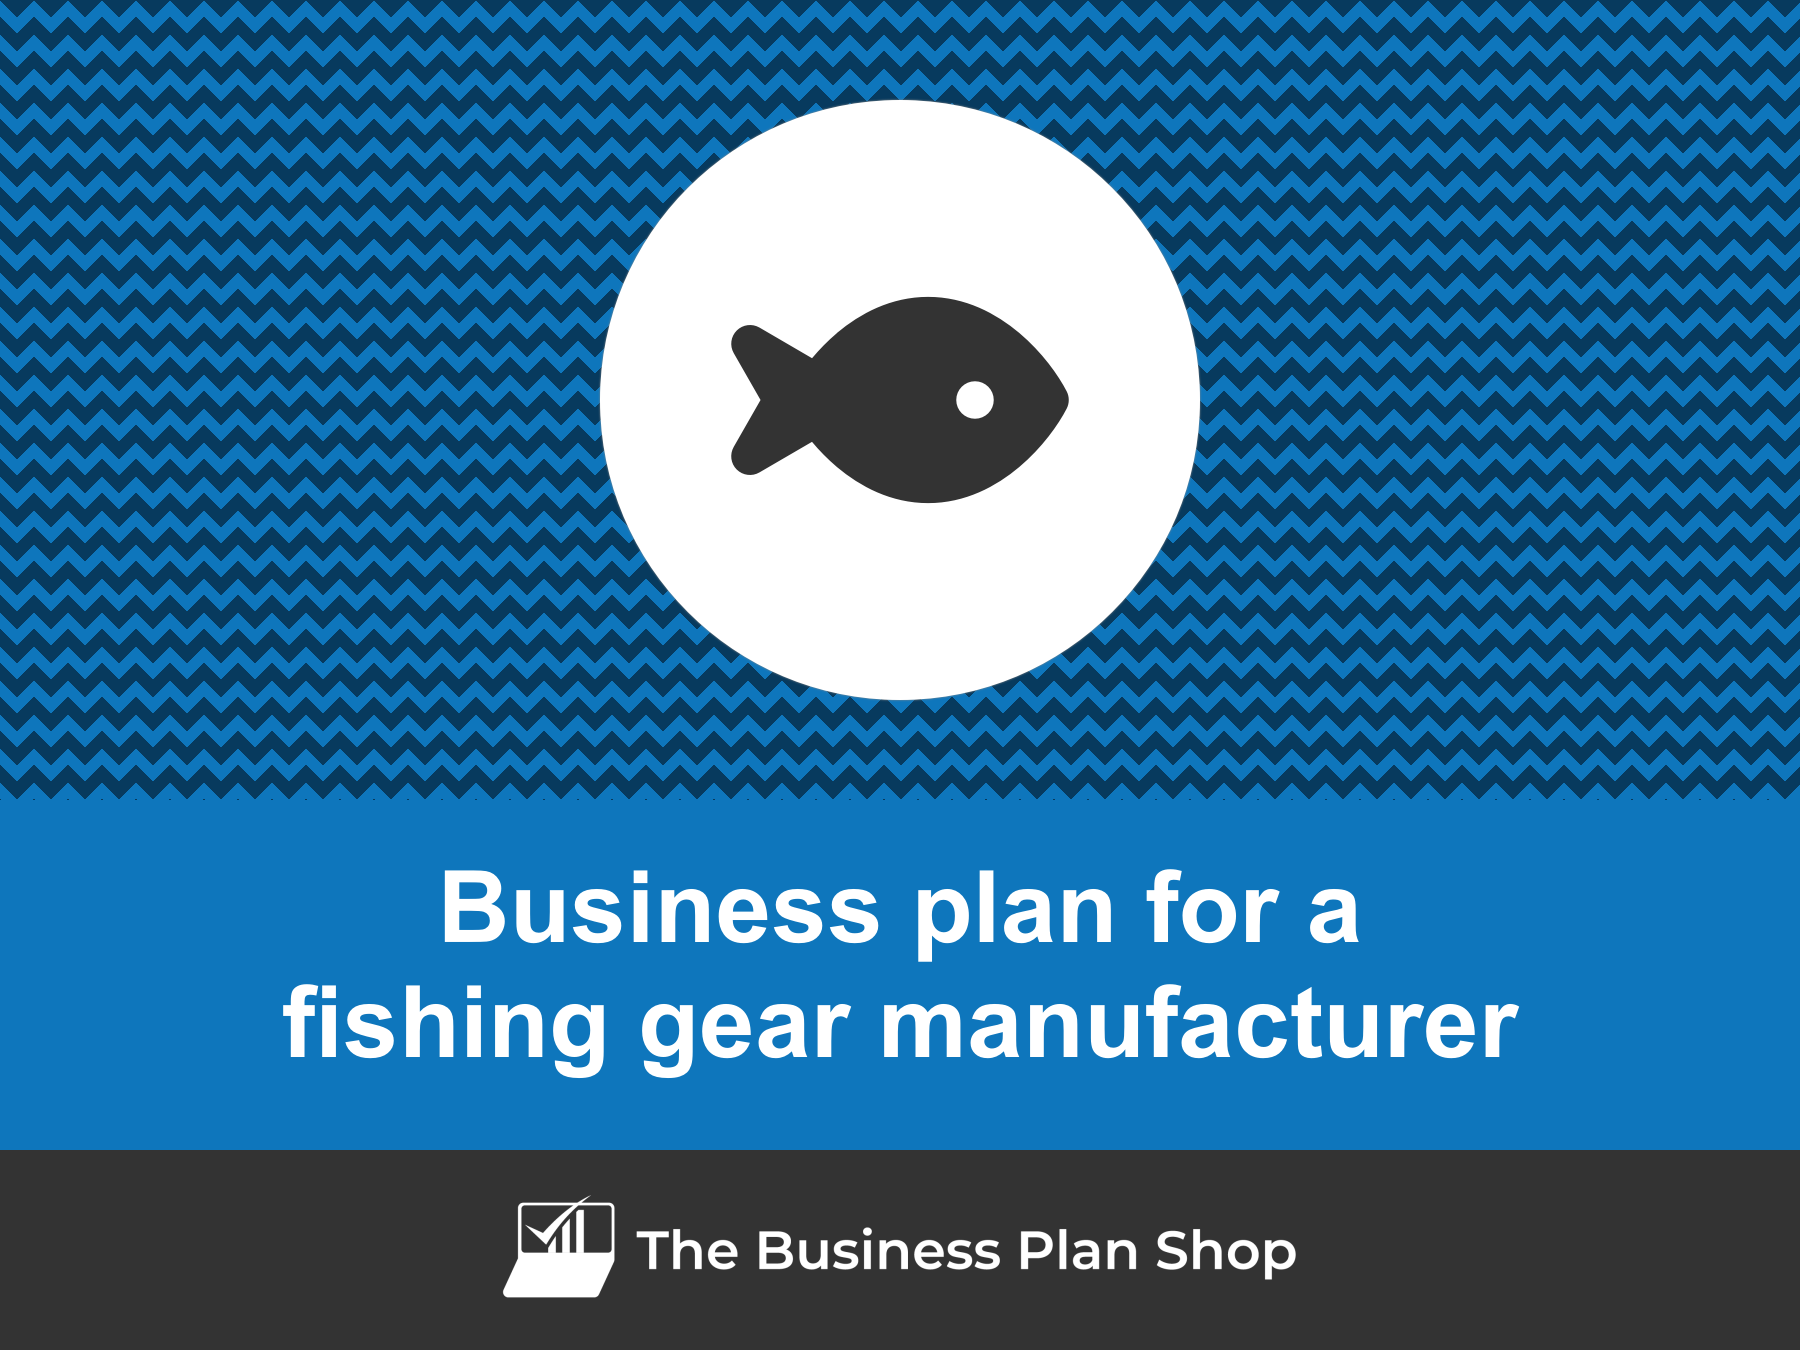 How to write a business plan for a fishing gear manufacturer?